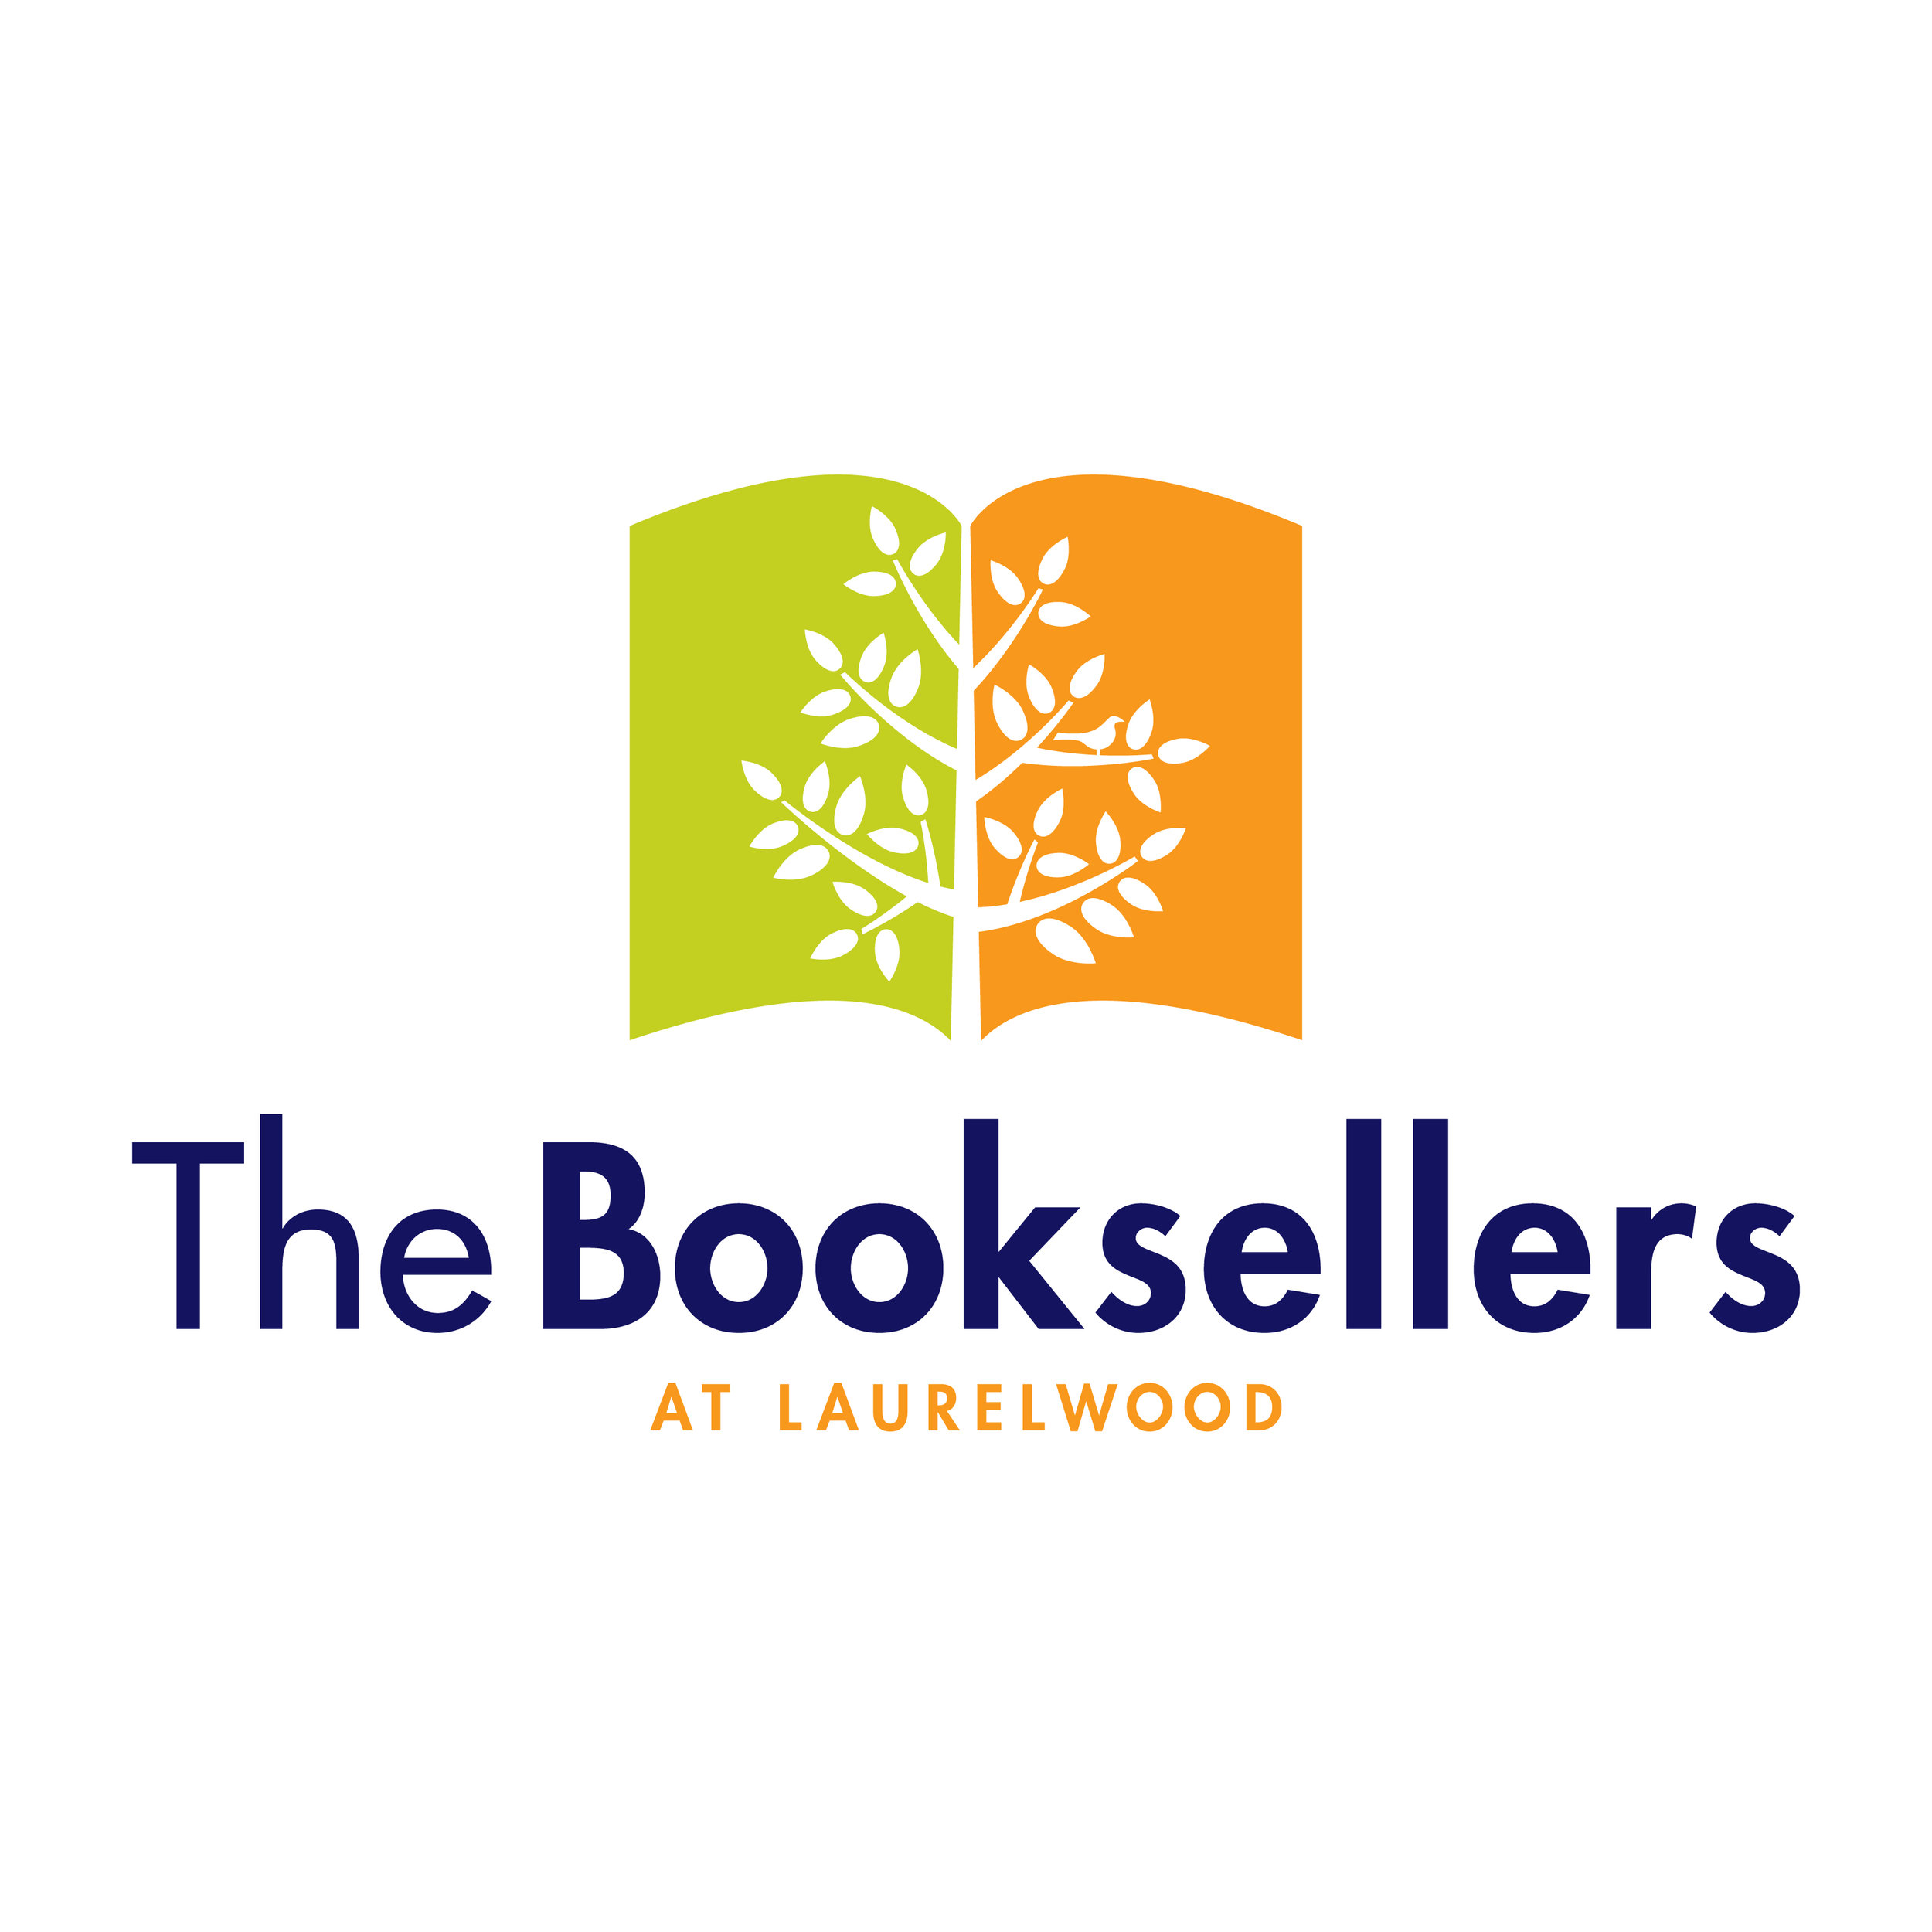  The Booksellers at Laurelwood logo  Creative and design by Chuck Mitchell  Laurelwood Center Memphis, Tennessee 